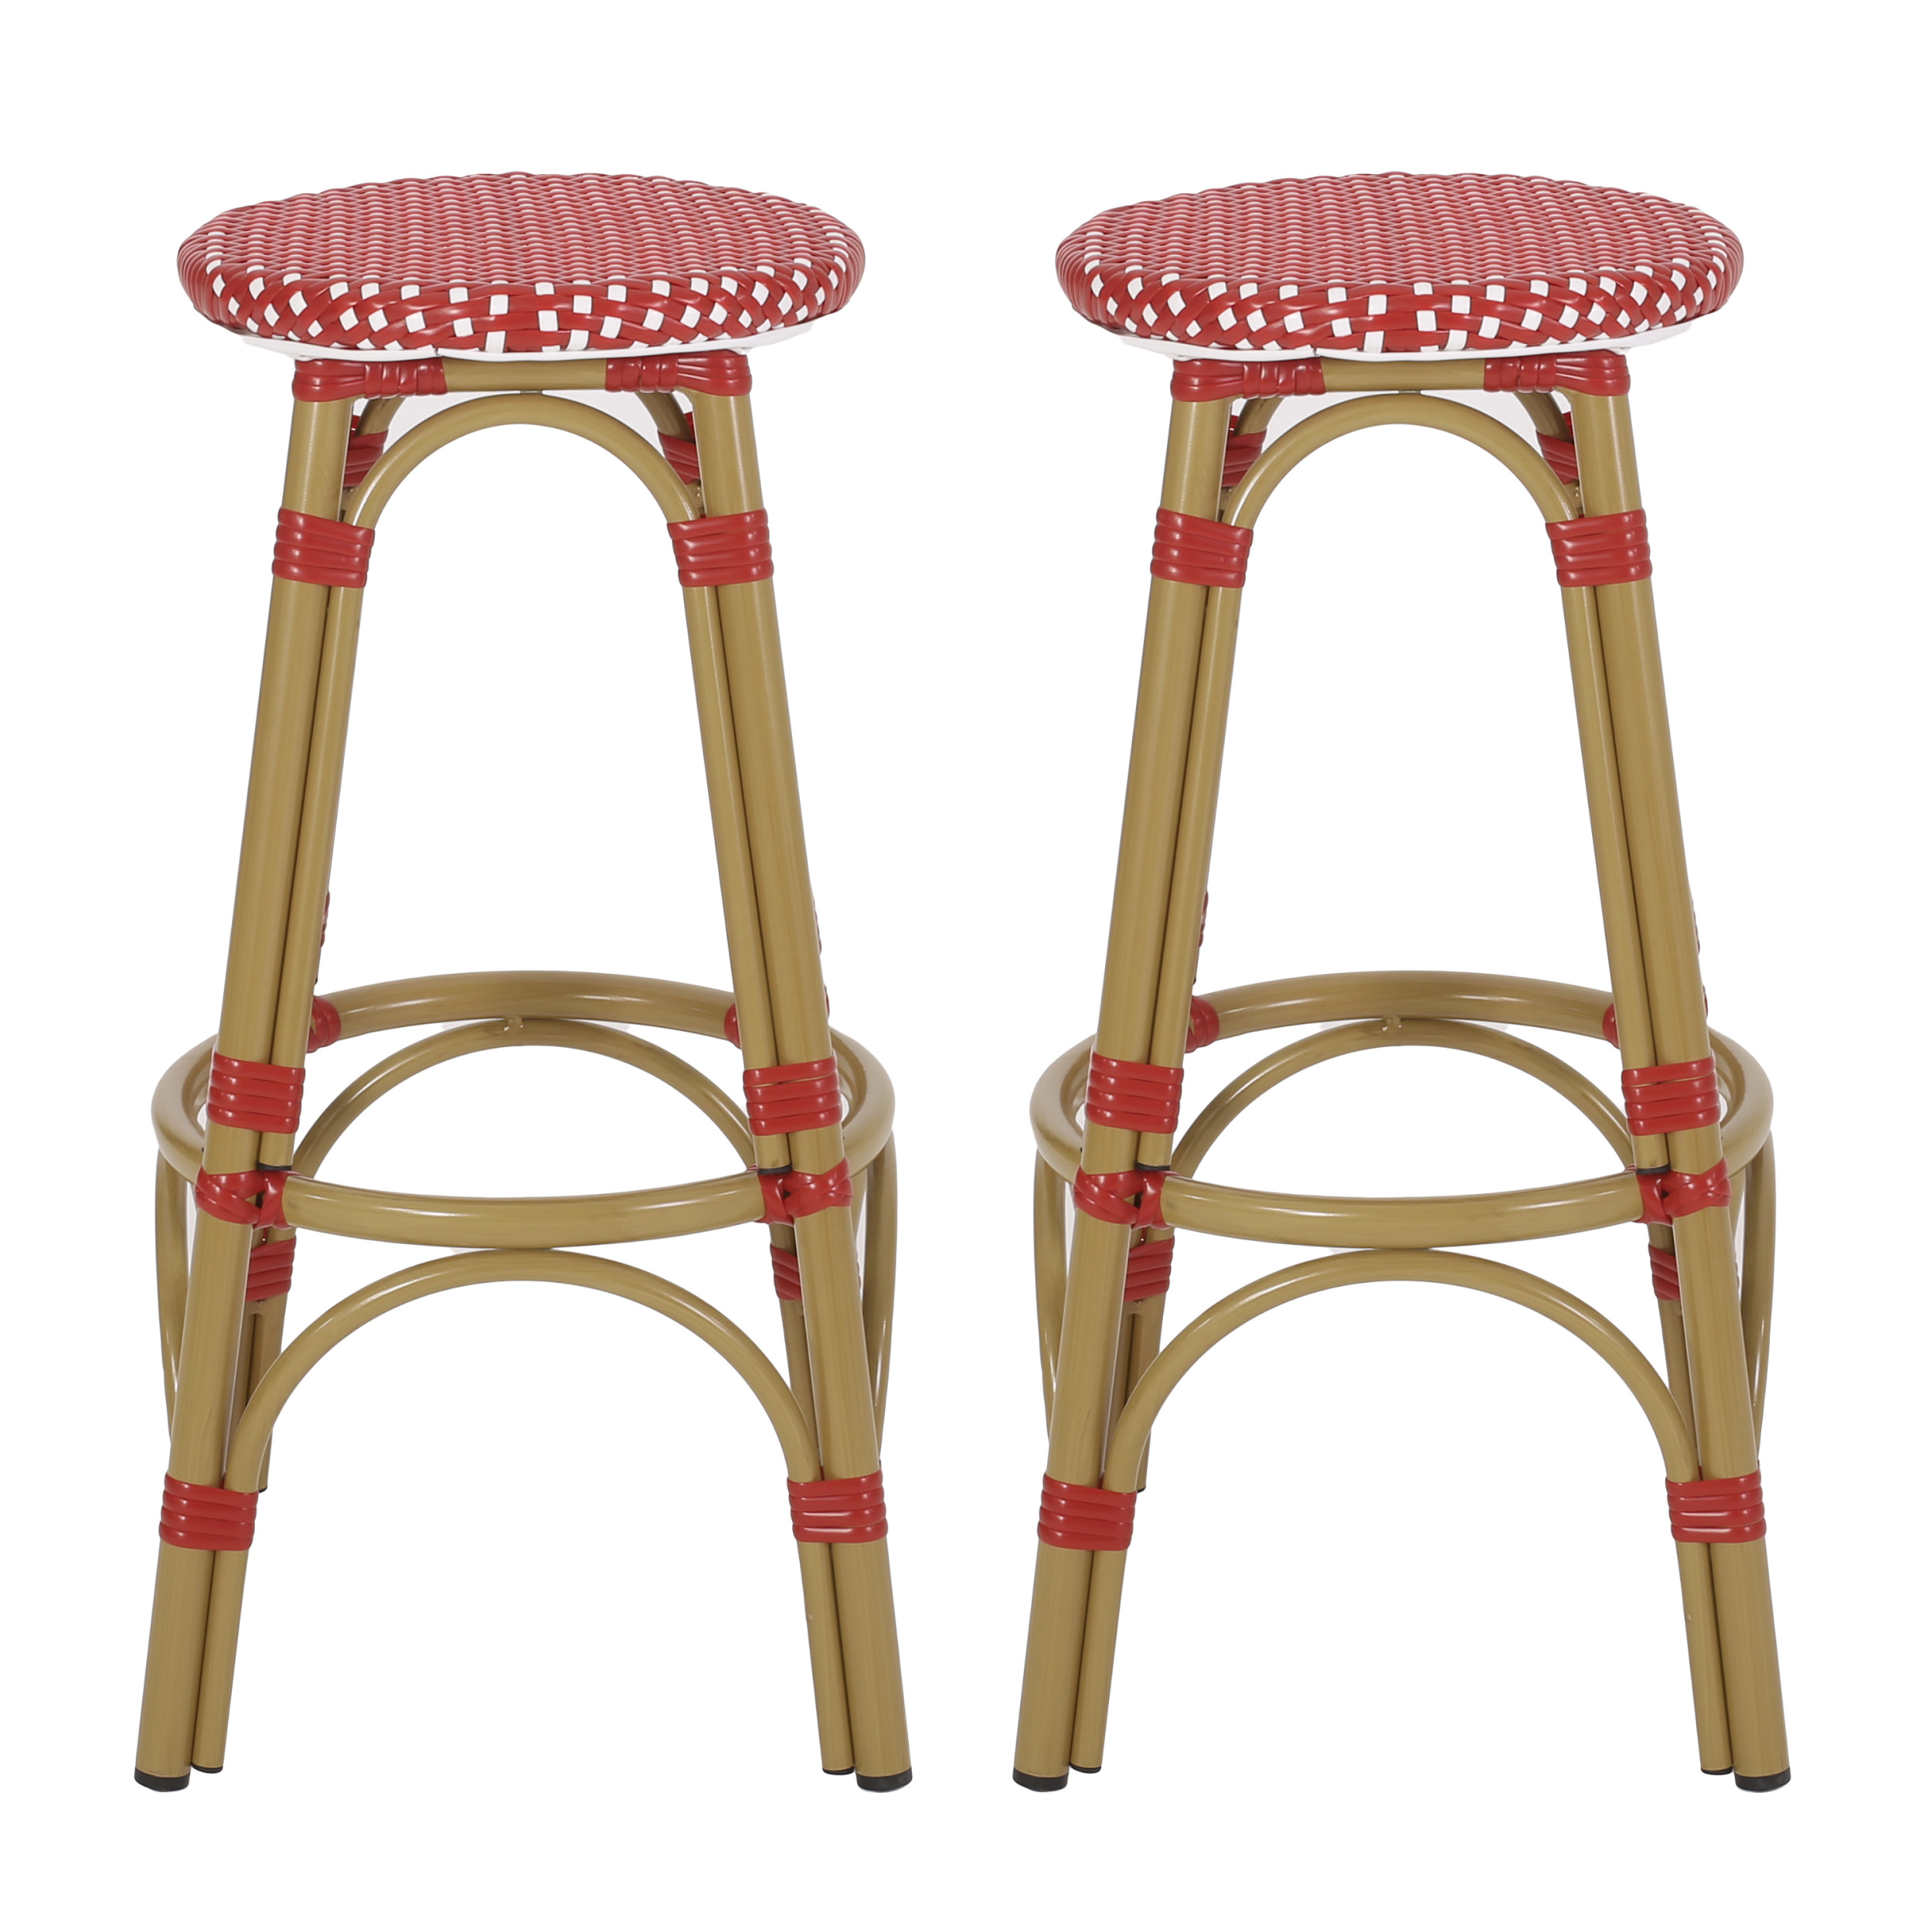 Wilbur Aluminum and Wicker Outdoor 29.5 Inch Barstools, Set of 2, Red, White, and Bamboo Finish - image 2 of 7